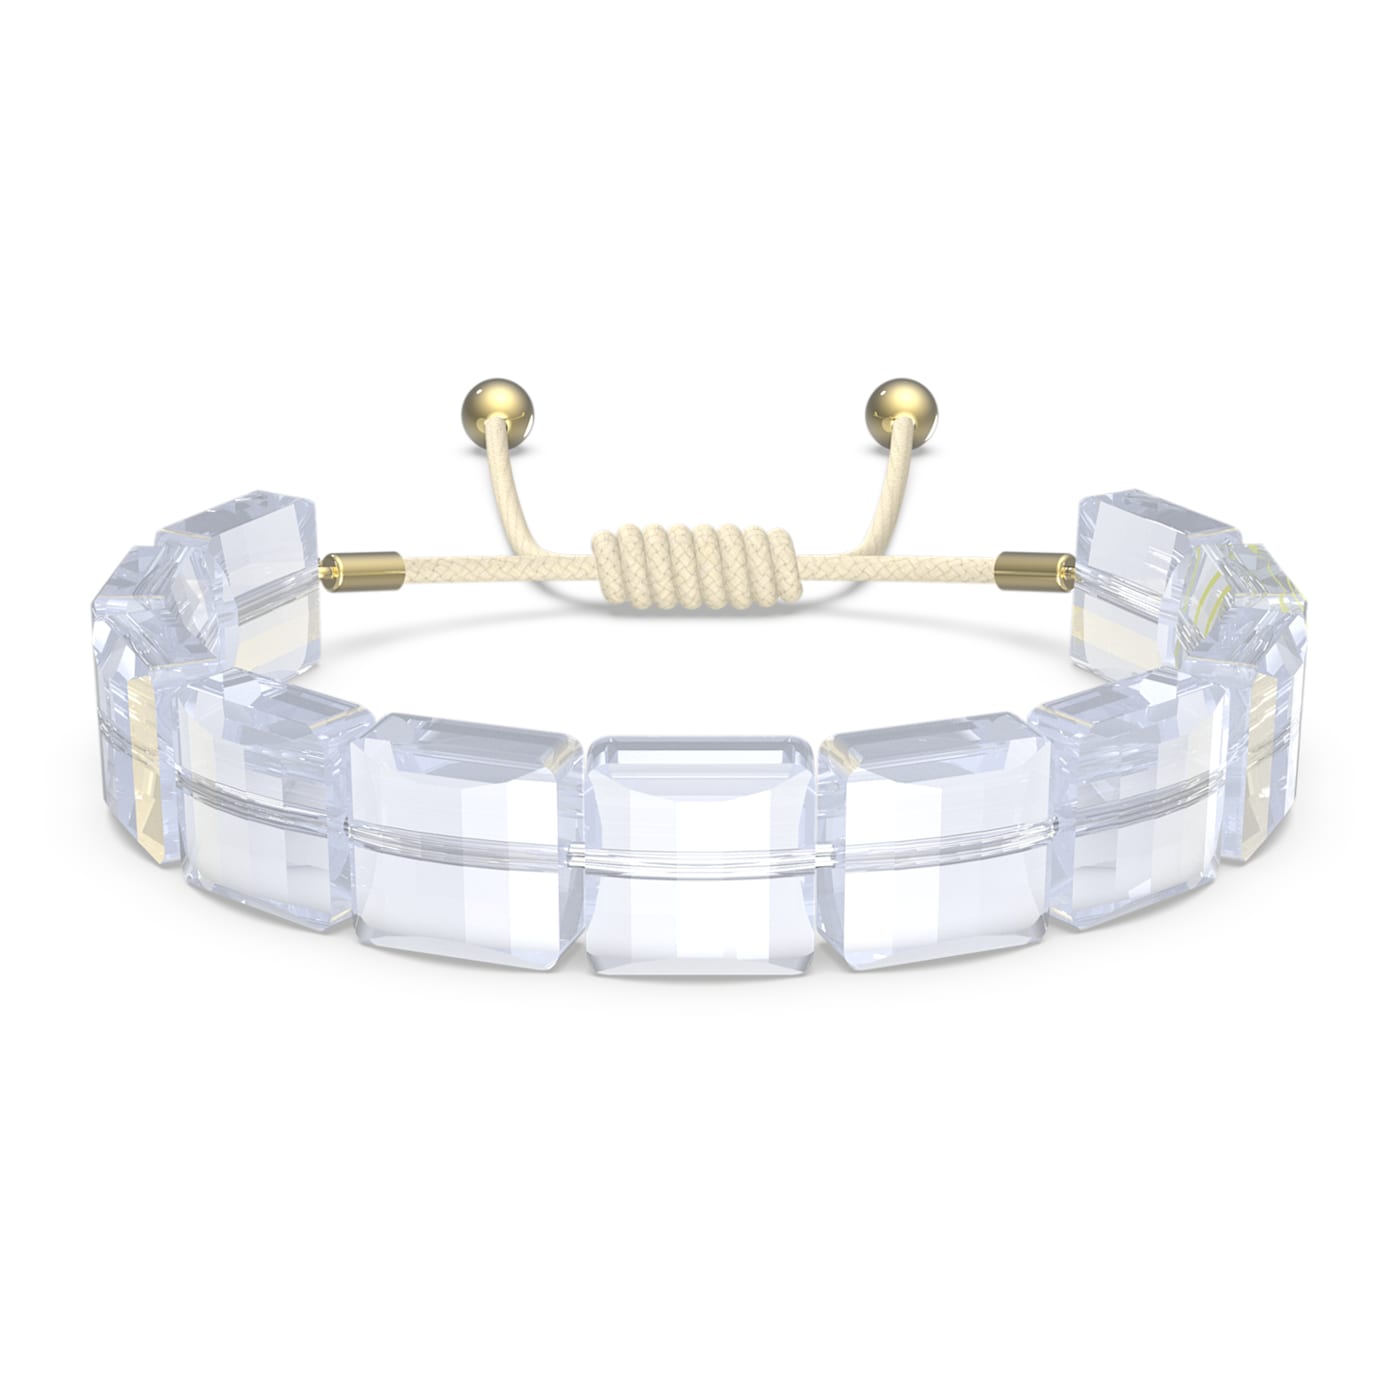 LETRA MOON BRACELET, WHITE, GOLD-TONE PLATED